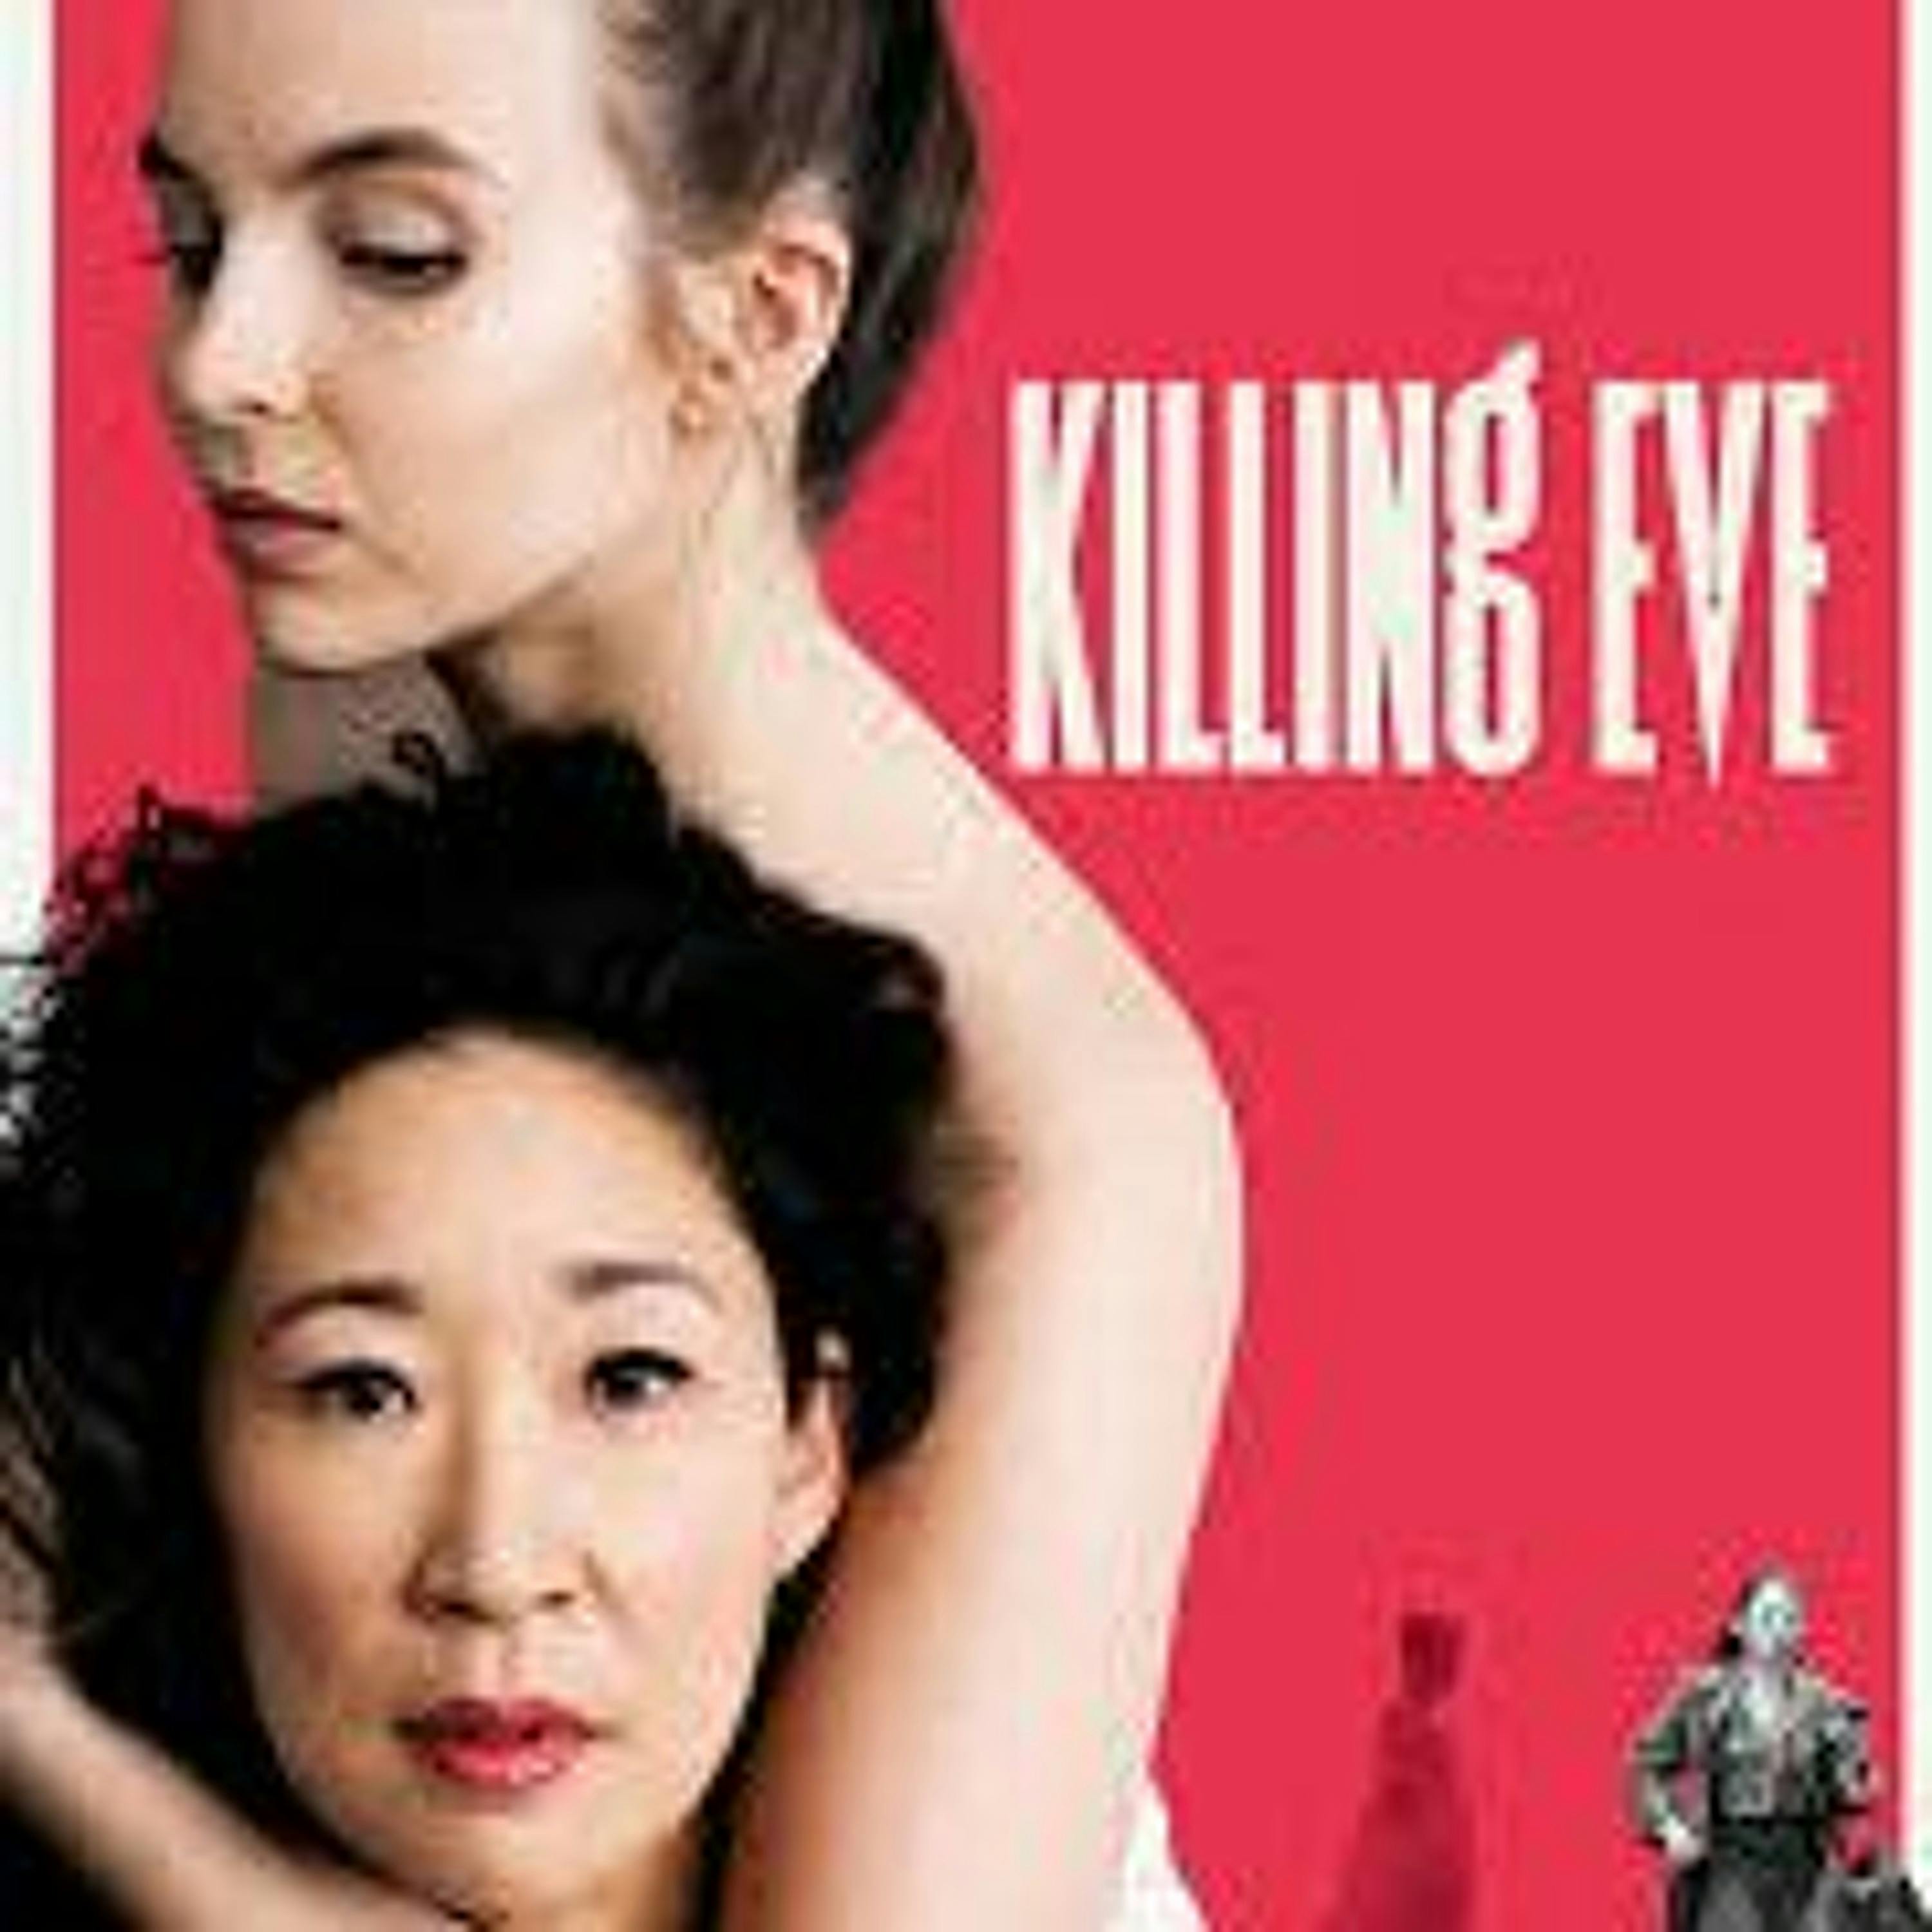 Killing Eve TV Series Review